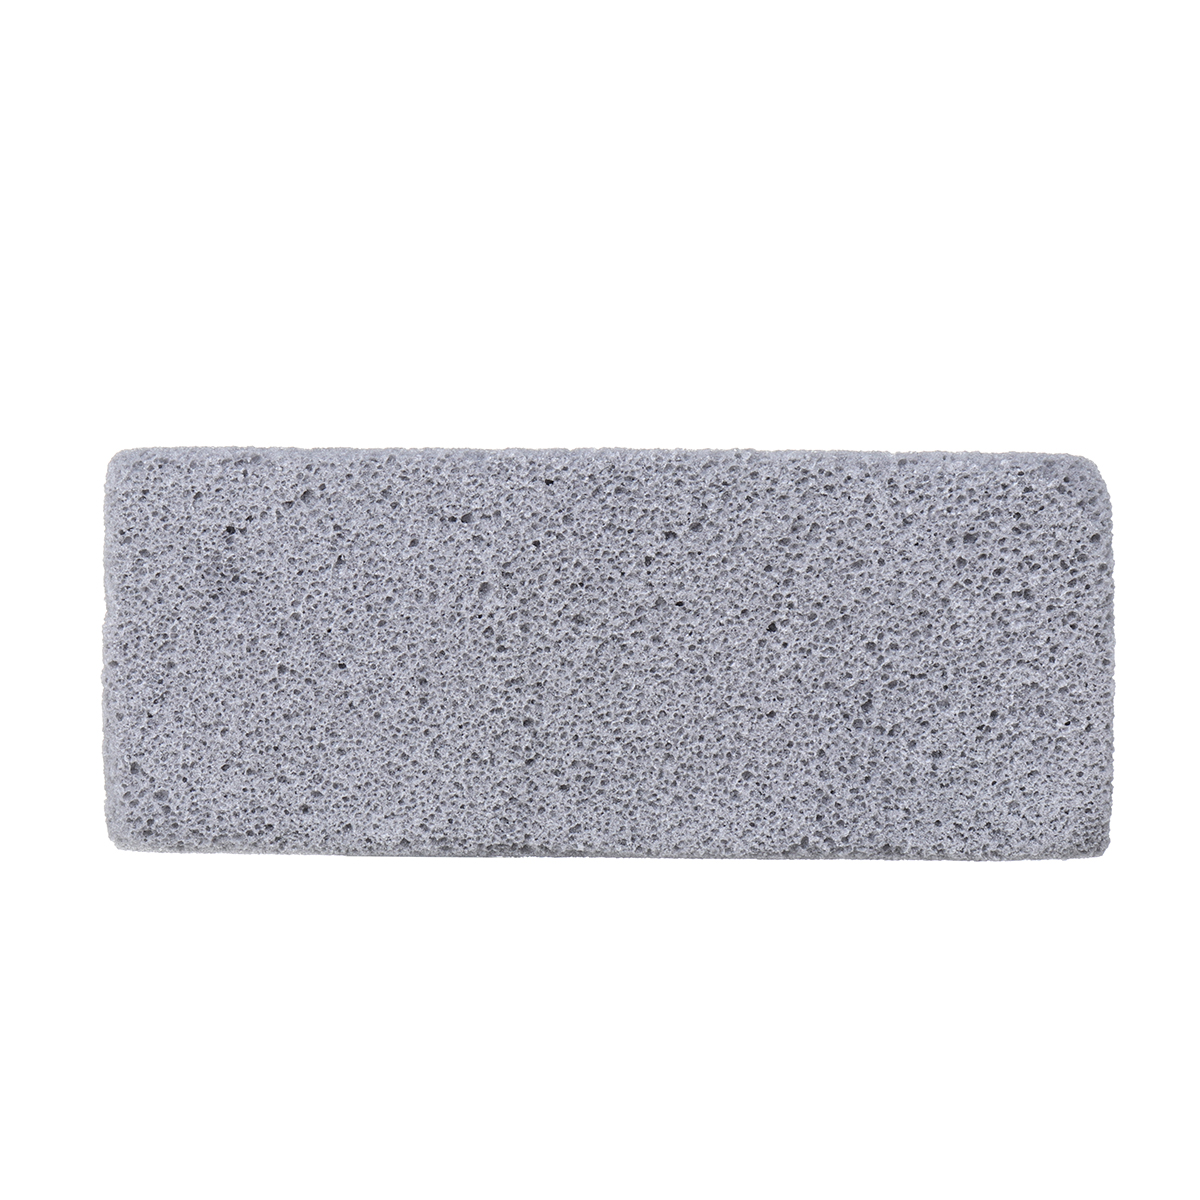 GriddleGrill-Cleaner-BBQ-Barbecue-Scraper-Griddle-Cleaning-Pumice-Stone-Brushes-1445352